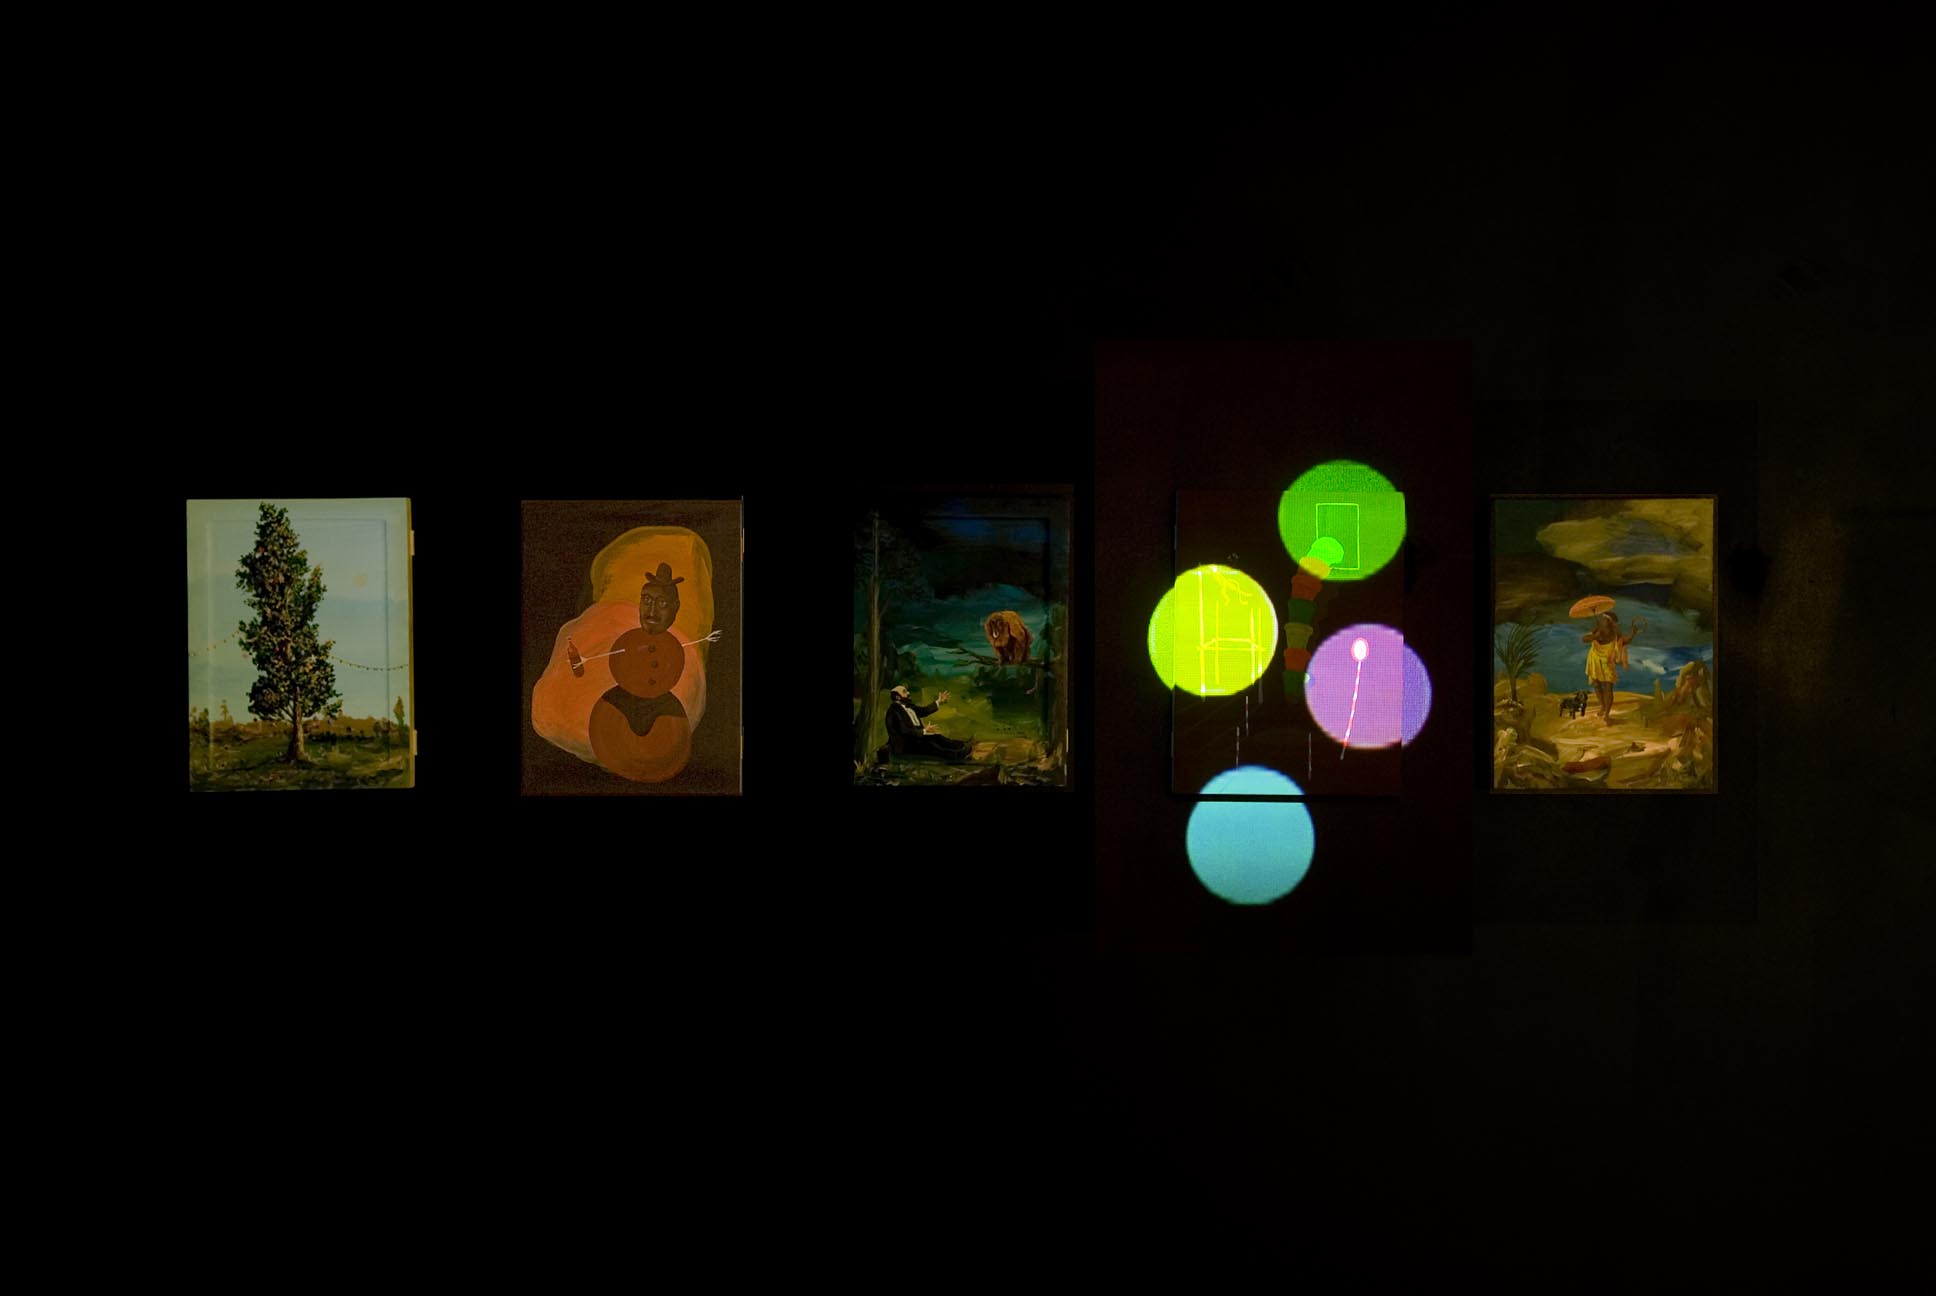     Untitled (Djordje Ozbolt) 2008 Flash Animaton Video Projection and 5 Paintings (Acrylic on Board)  Dimensions Variable 